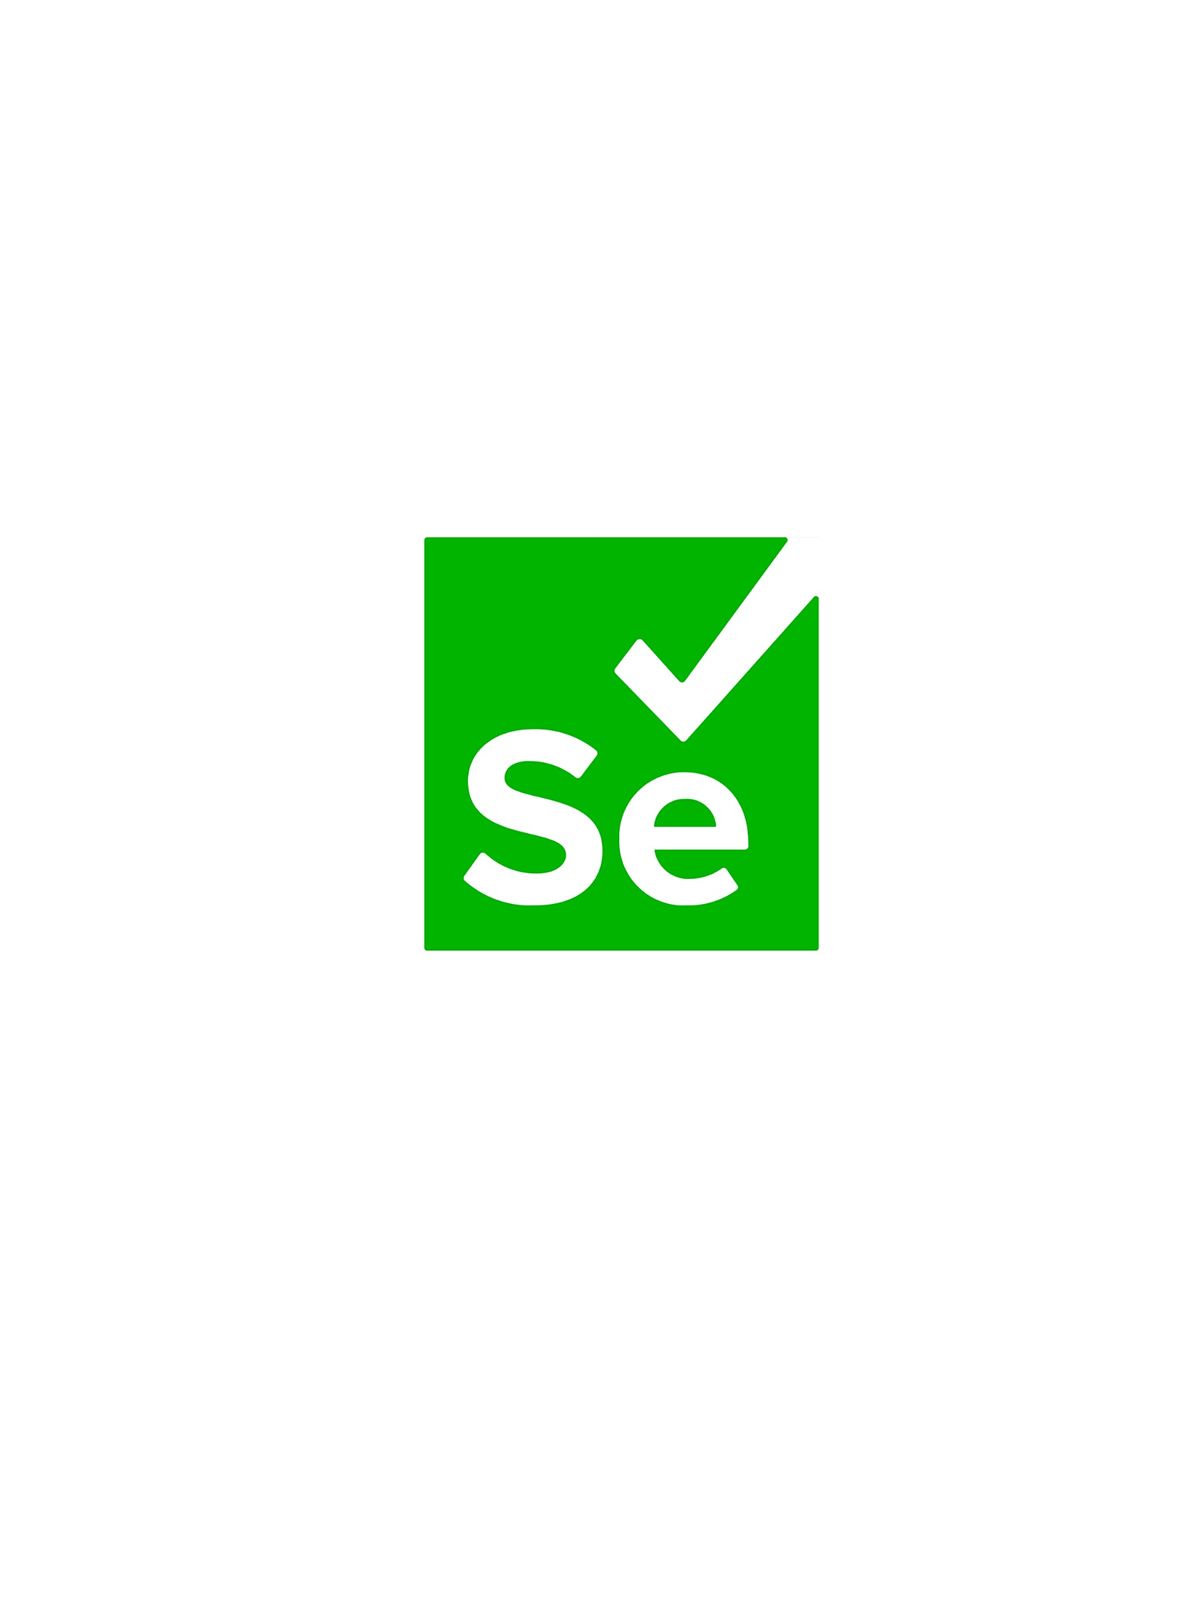 4 Weekends Selenium Automation Testing Training Course Chantilly